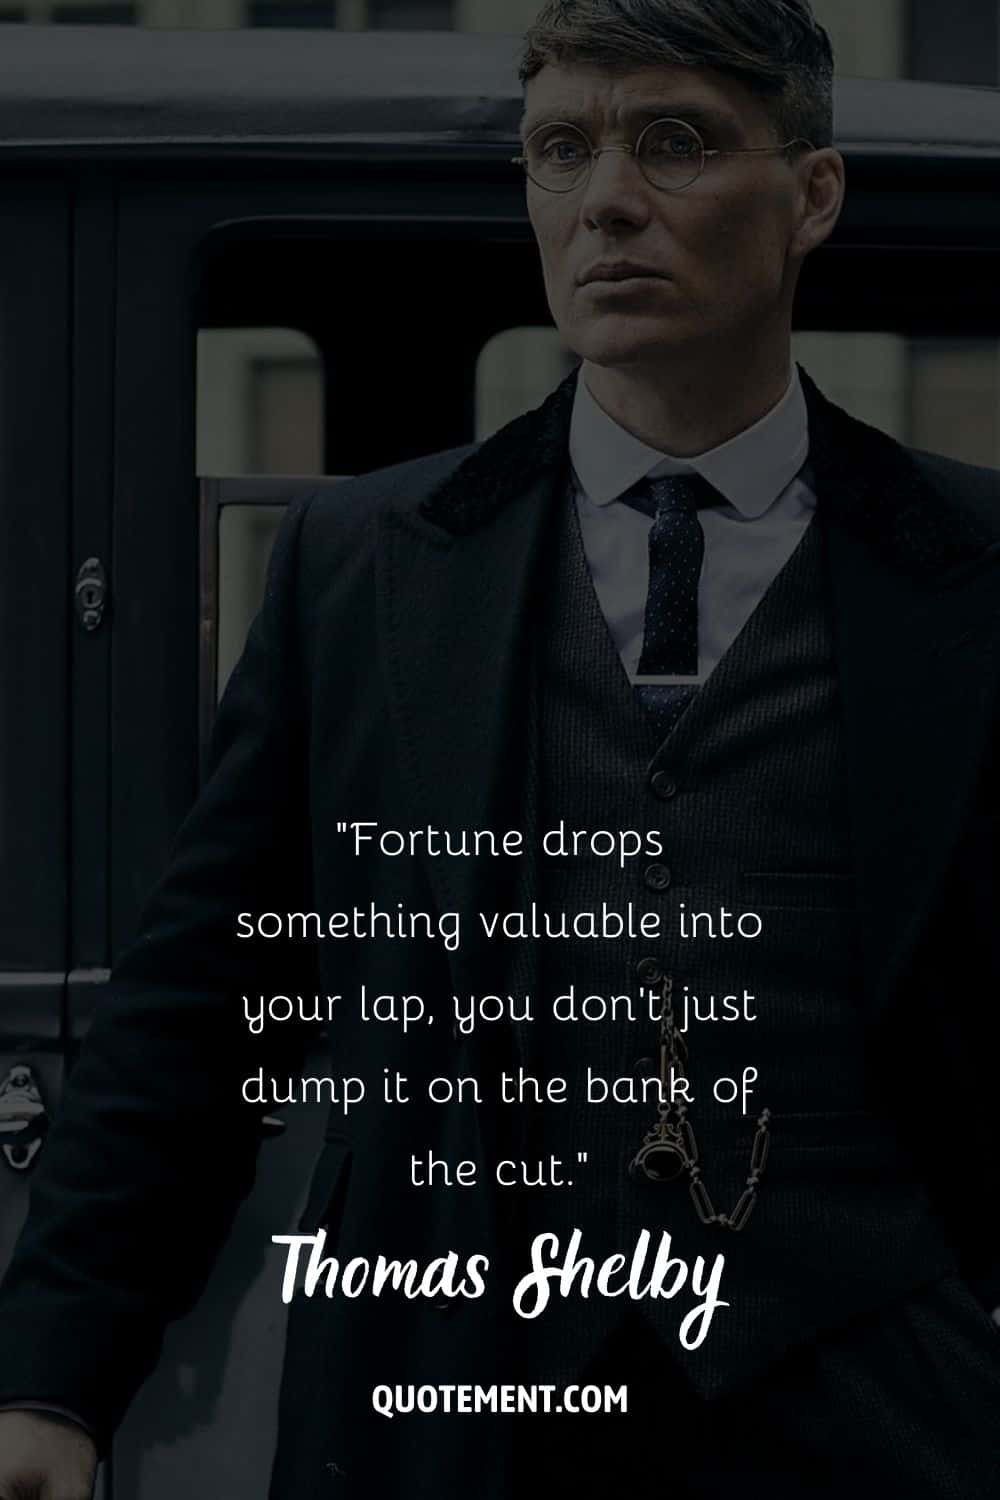 Cillian Murphy dons Peaky Blinder attire representing best tommy shelby quote
